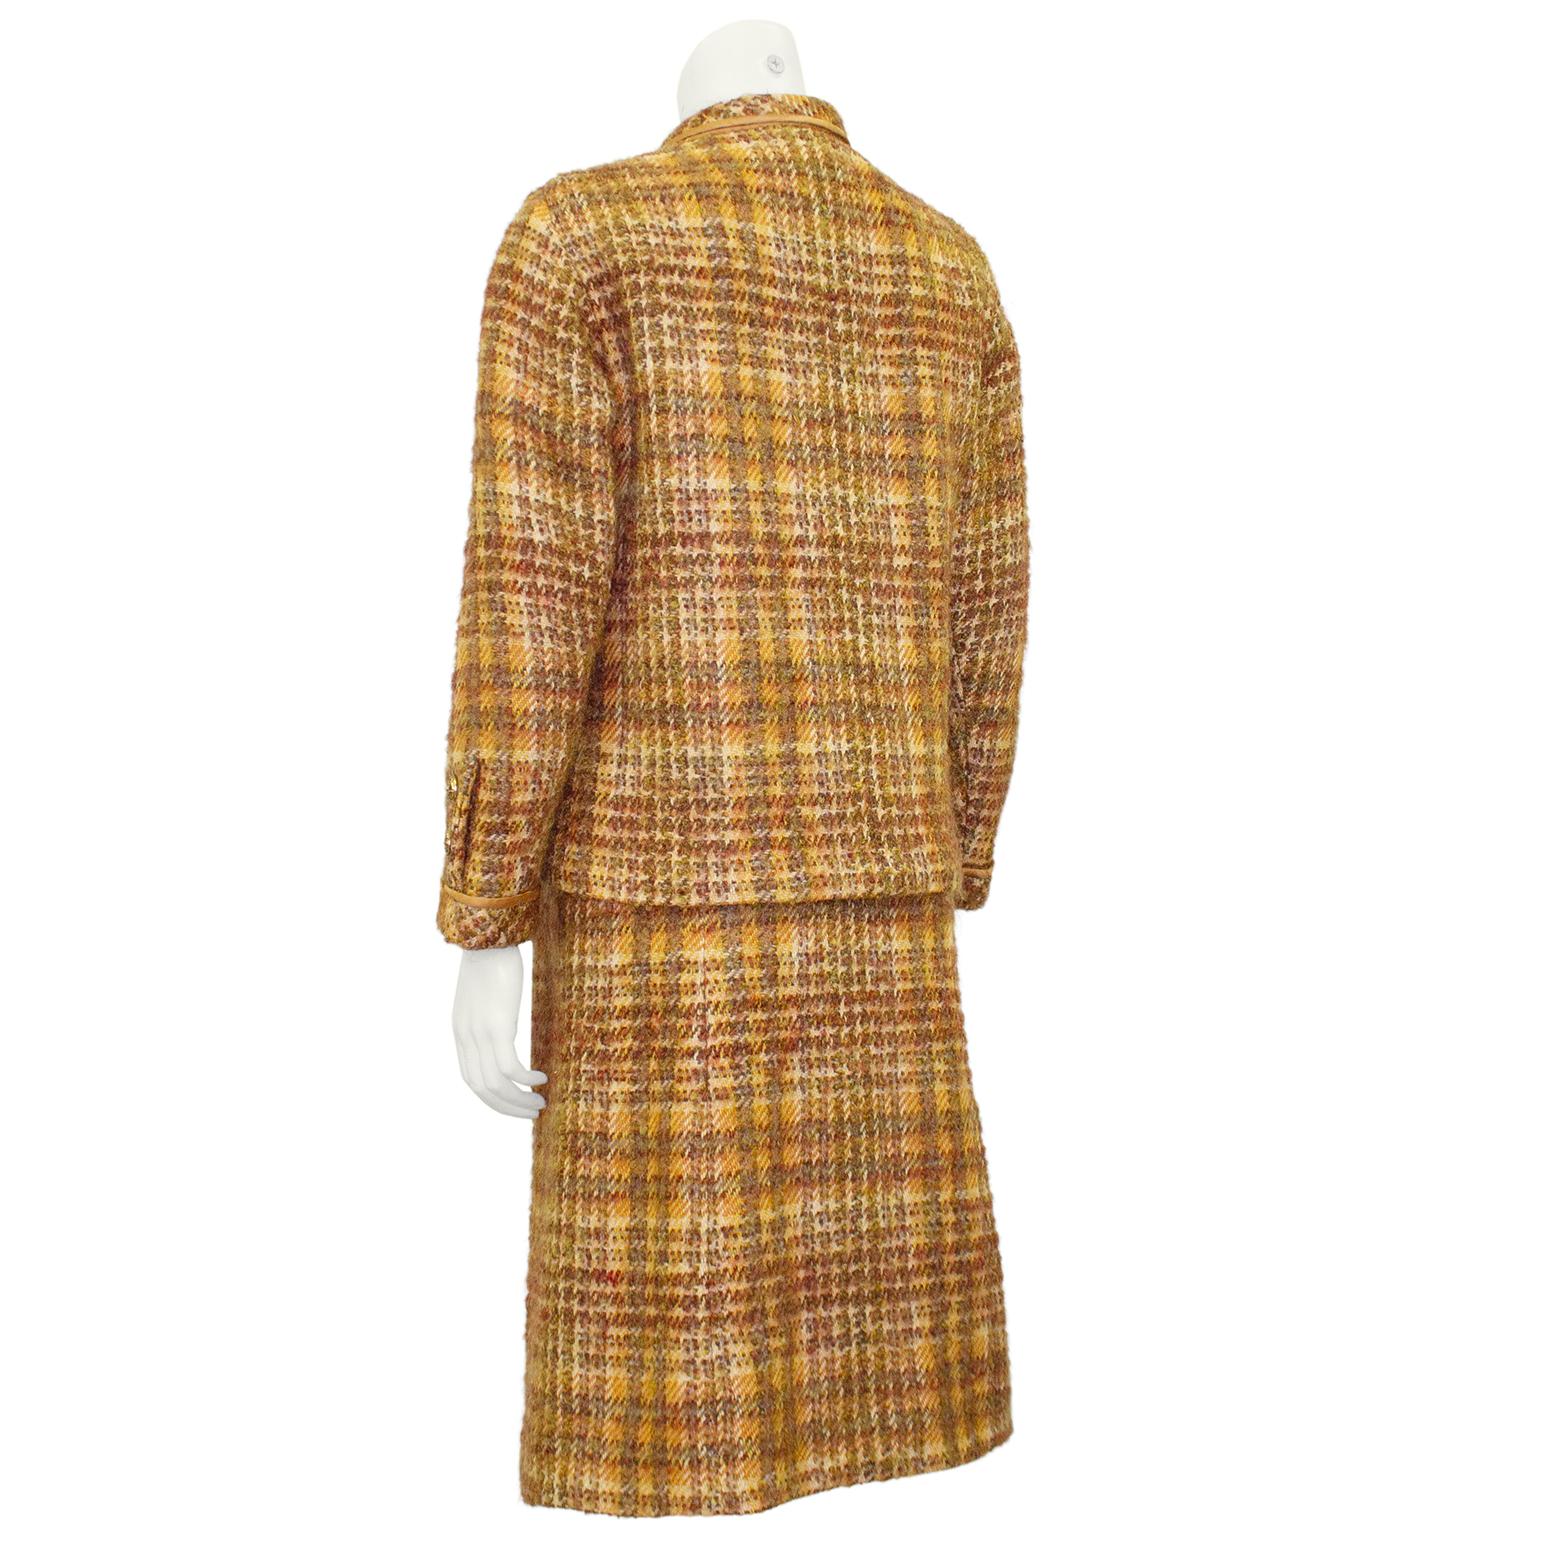 1960s Chanel Haute Couture Copper Tweed Jacket and Dress Ensemble  In Good Condition For Sale In Toronto, Ontario